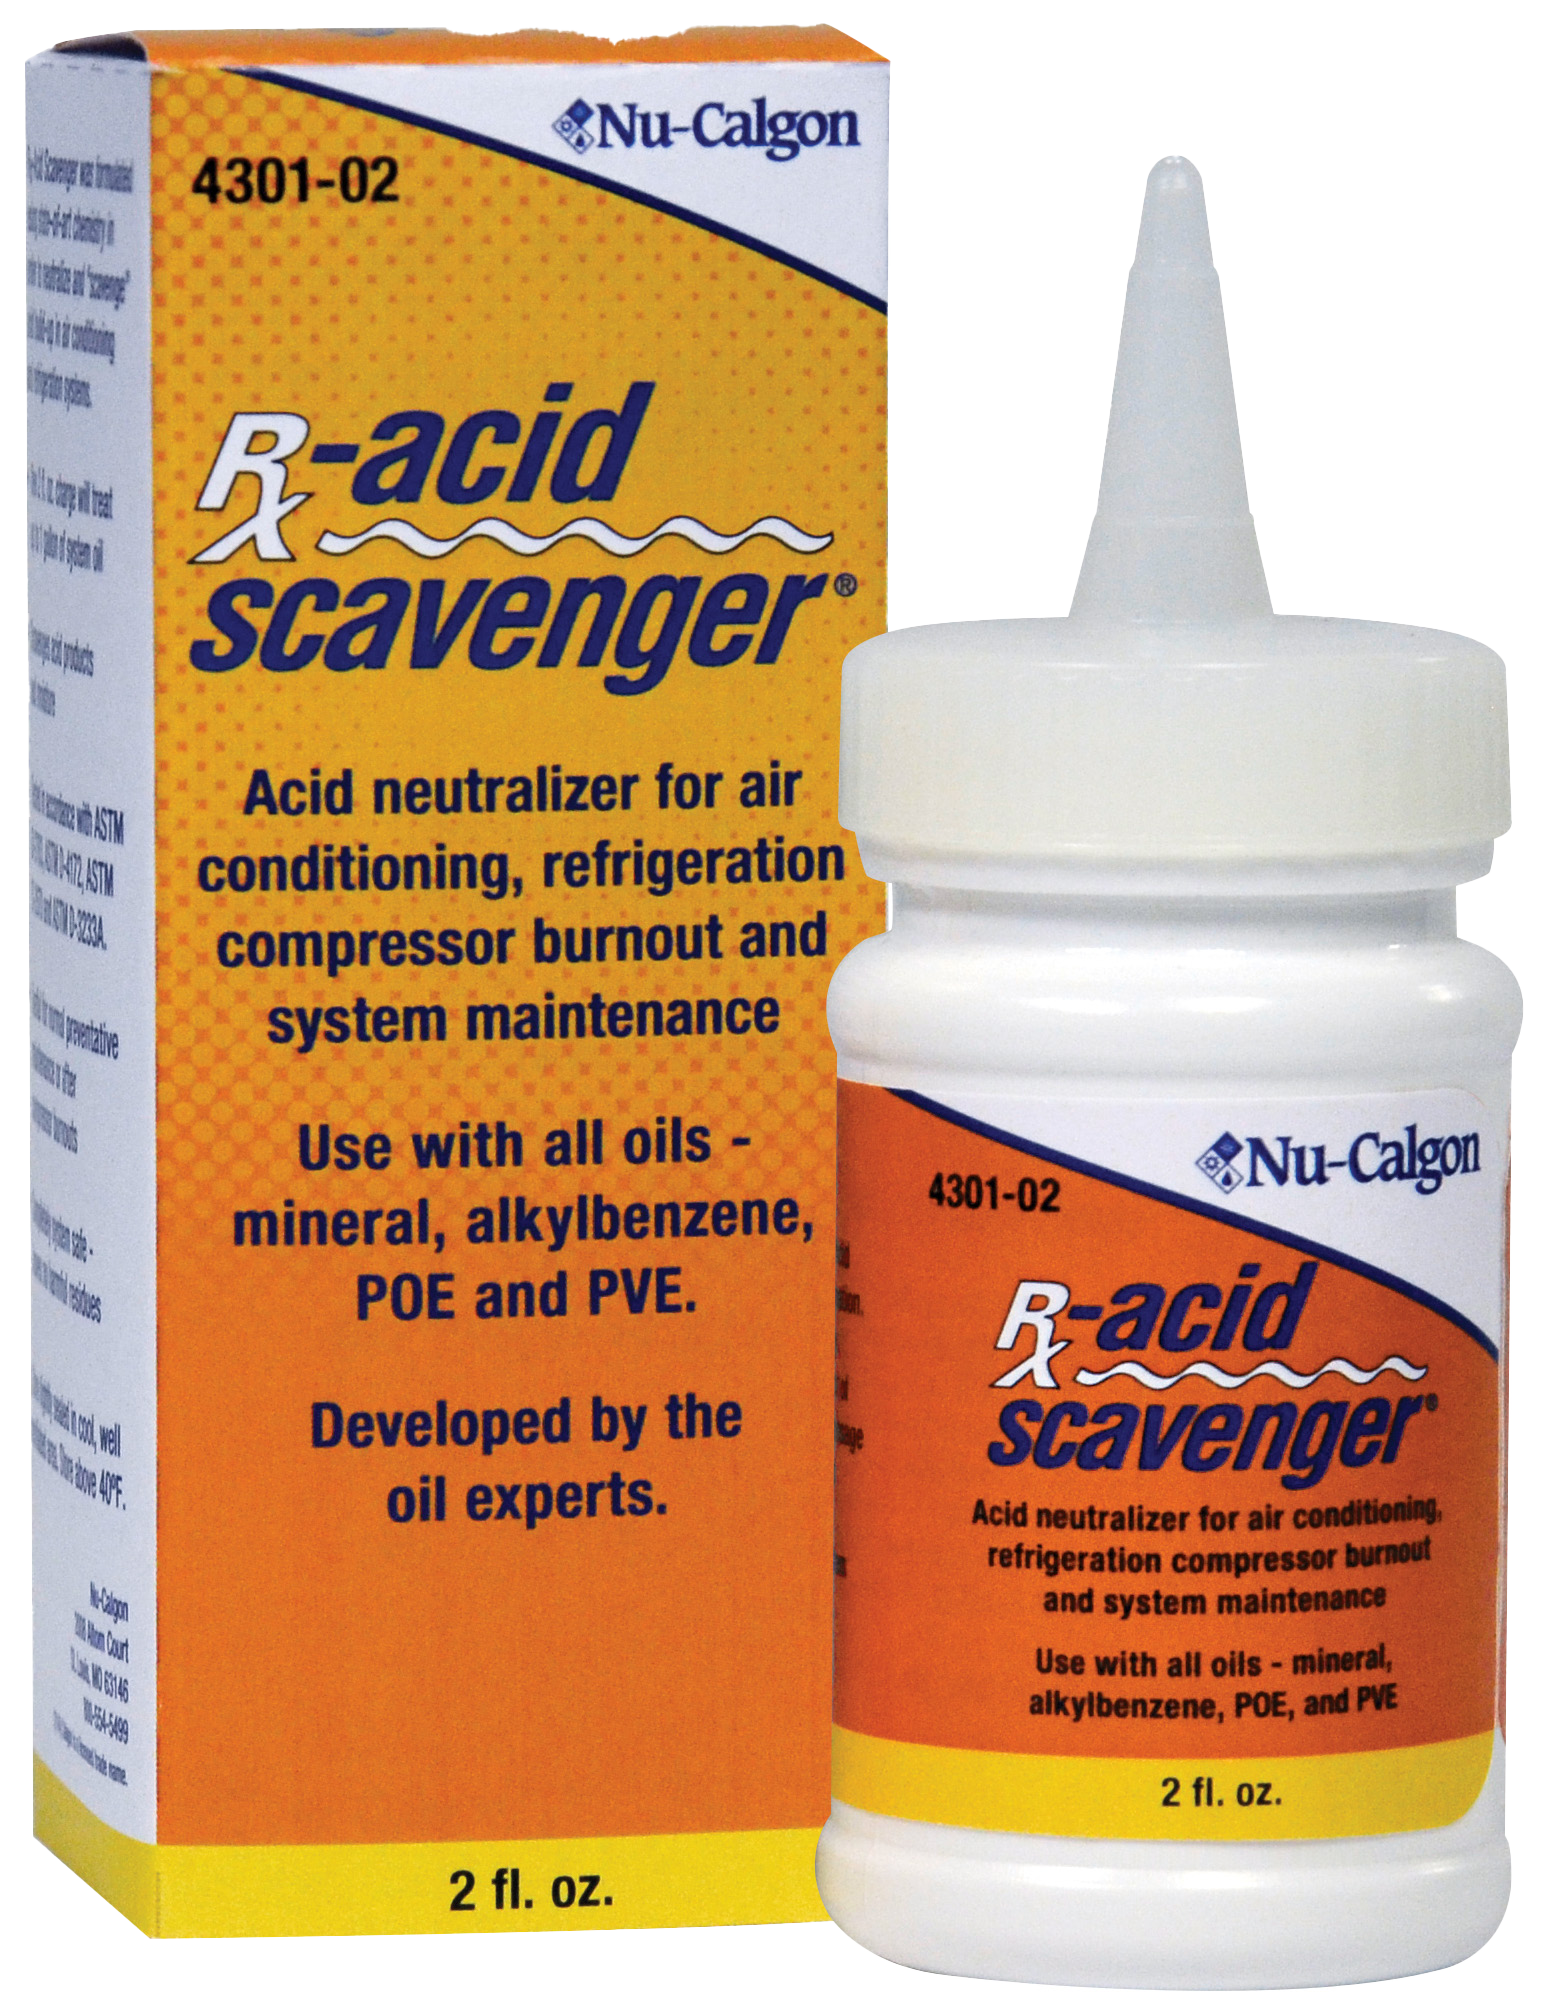 4301-02 RX-ACID SCAVENGER BOTTLE - Cleaners and Degreasers